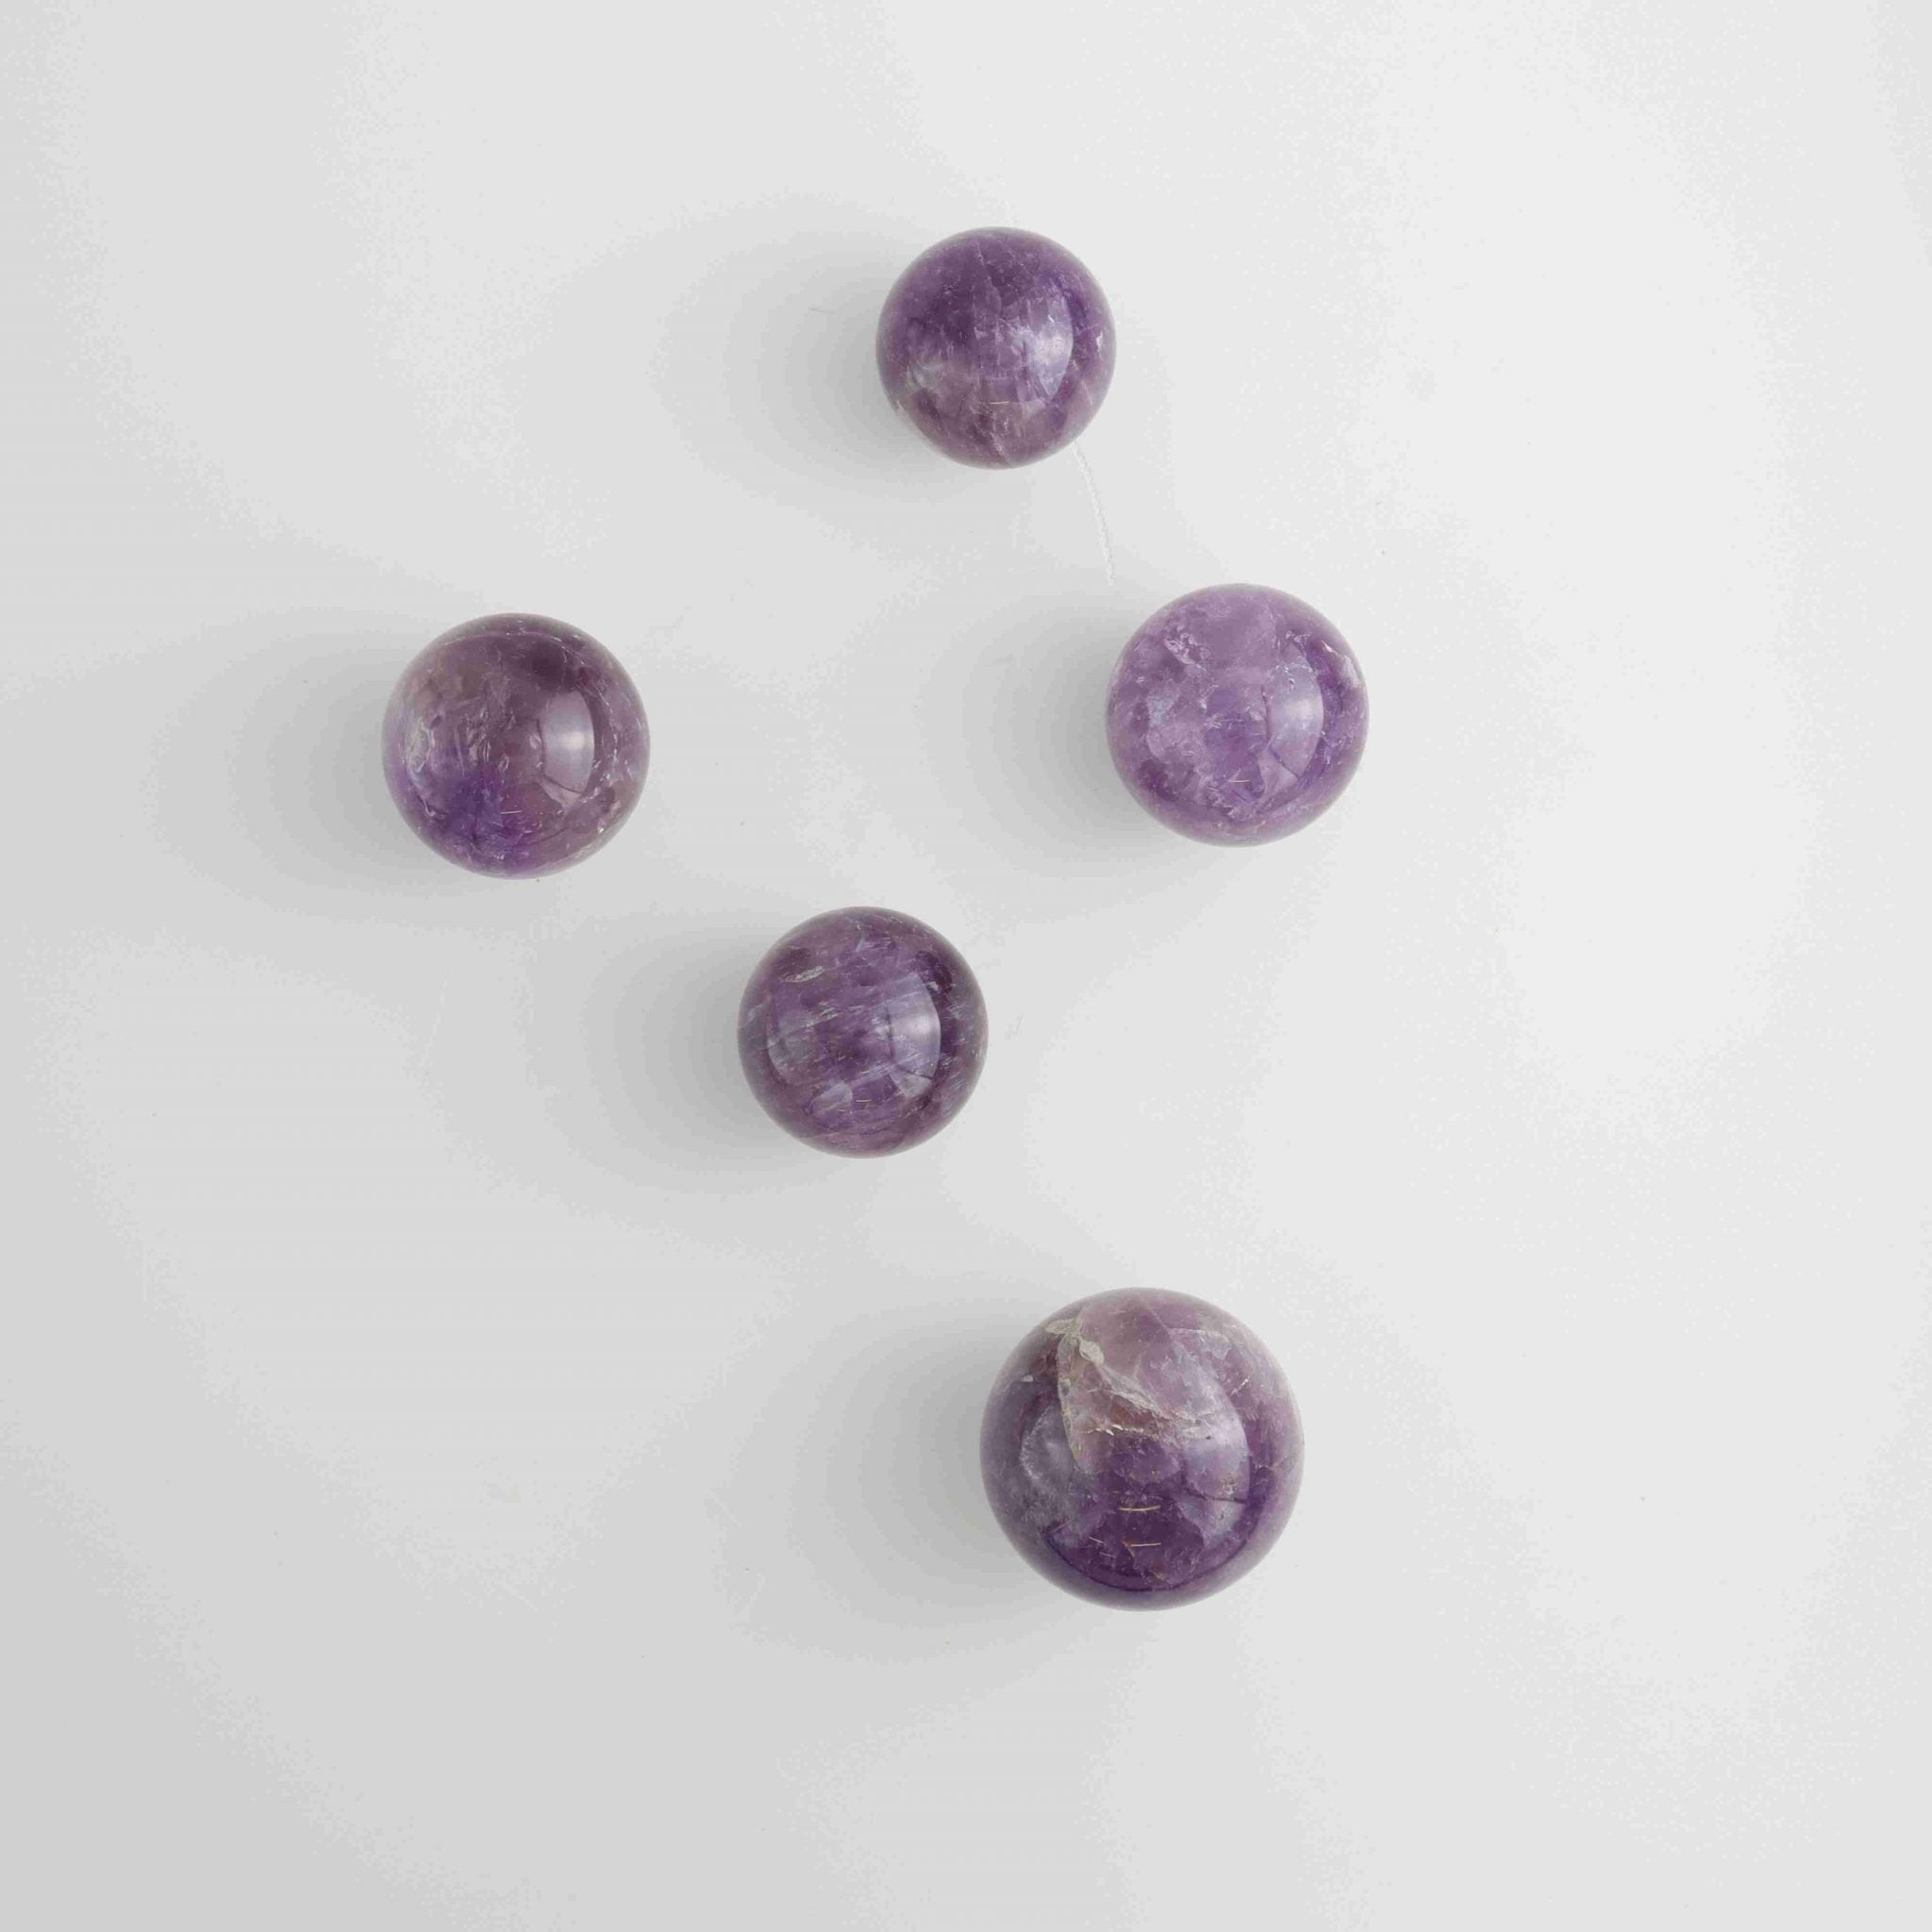 https://miesperanzaminerals.com/cdn/shop/products/1-Kg-Amethyst-Spheres.803.95-1-rotated-scaled.jpg?v=1690493182&width=3840